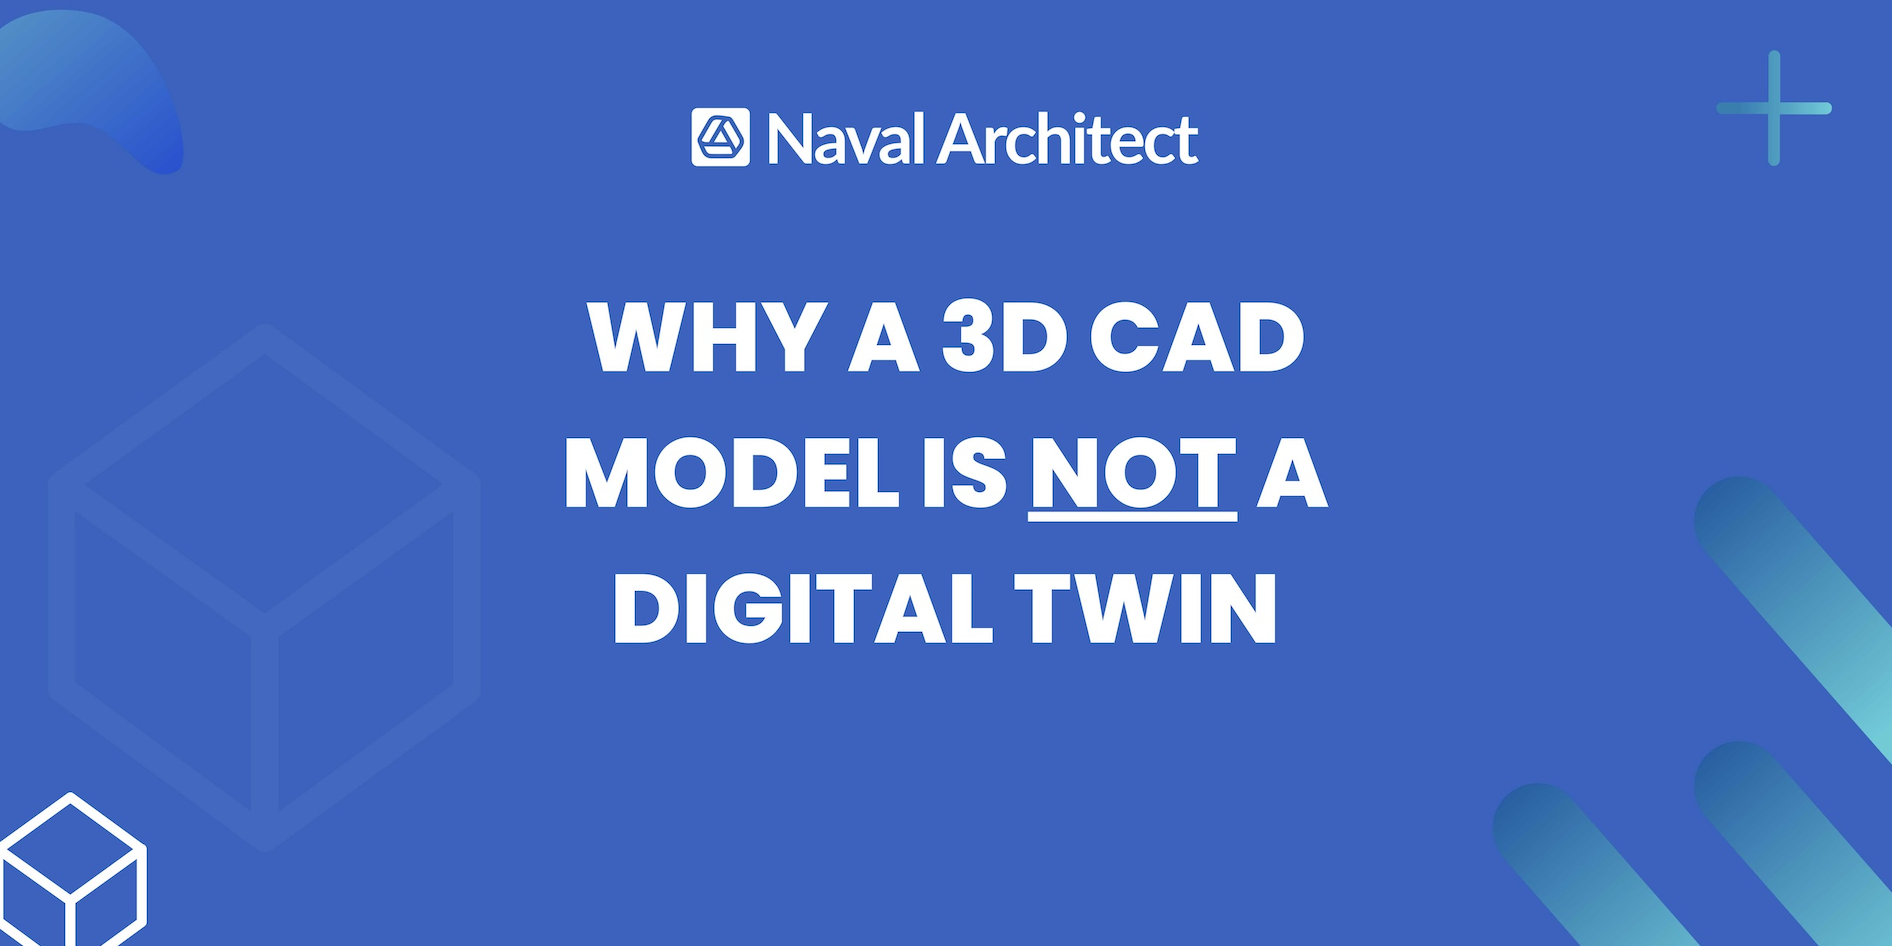 Digital Twin is more than 3D CAD Model